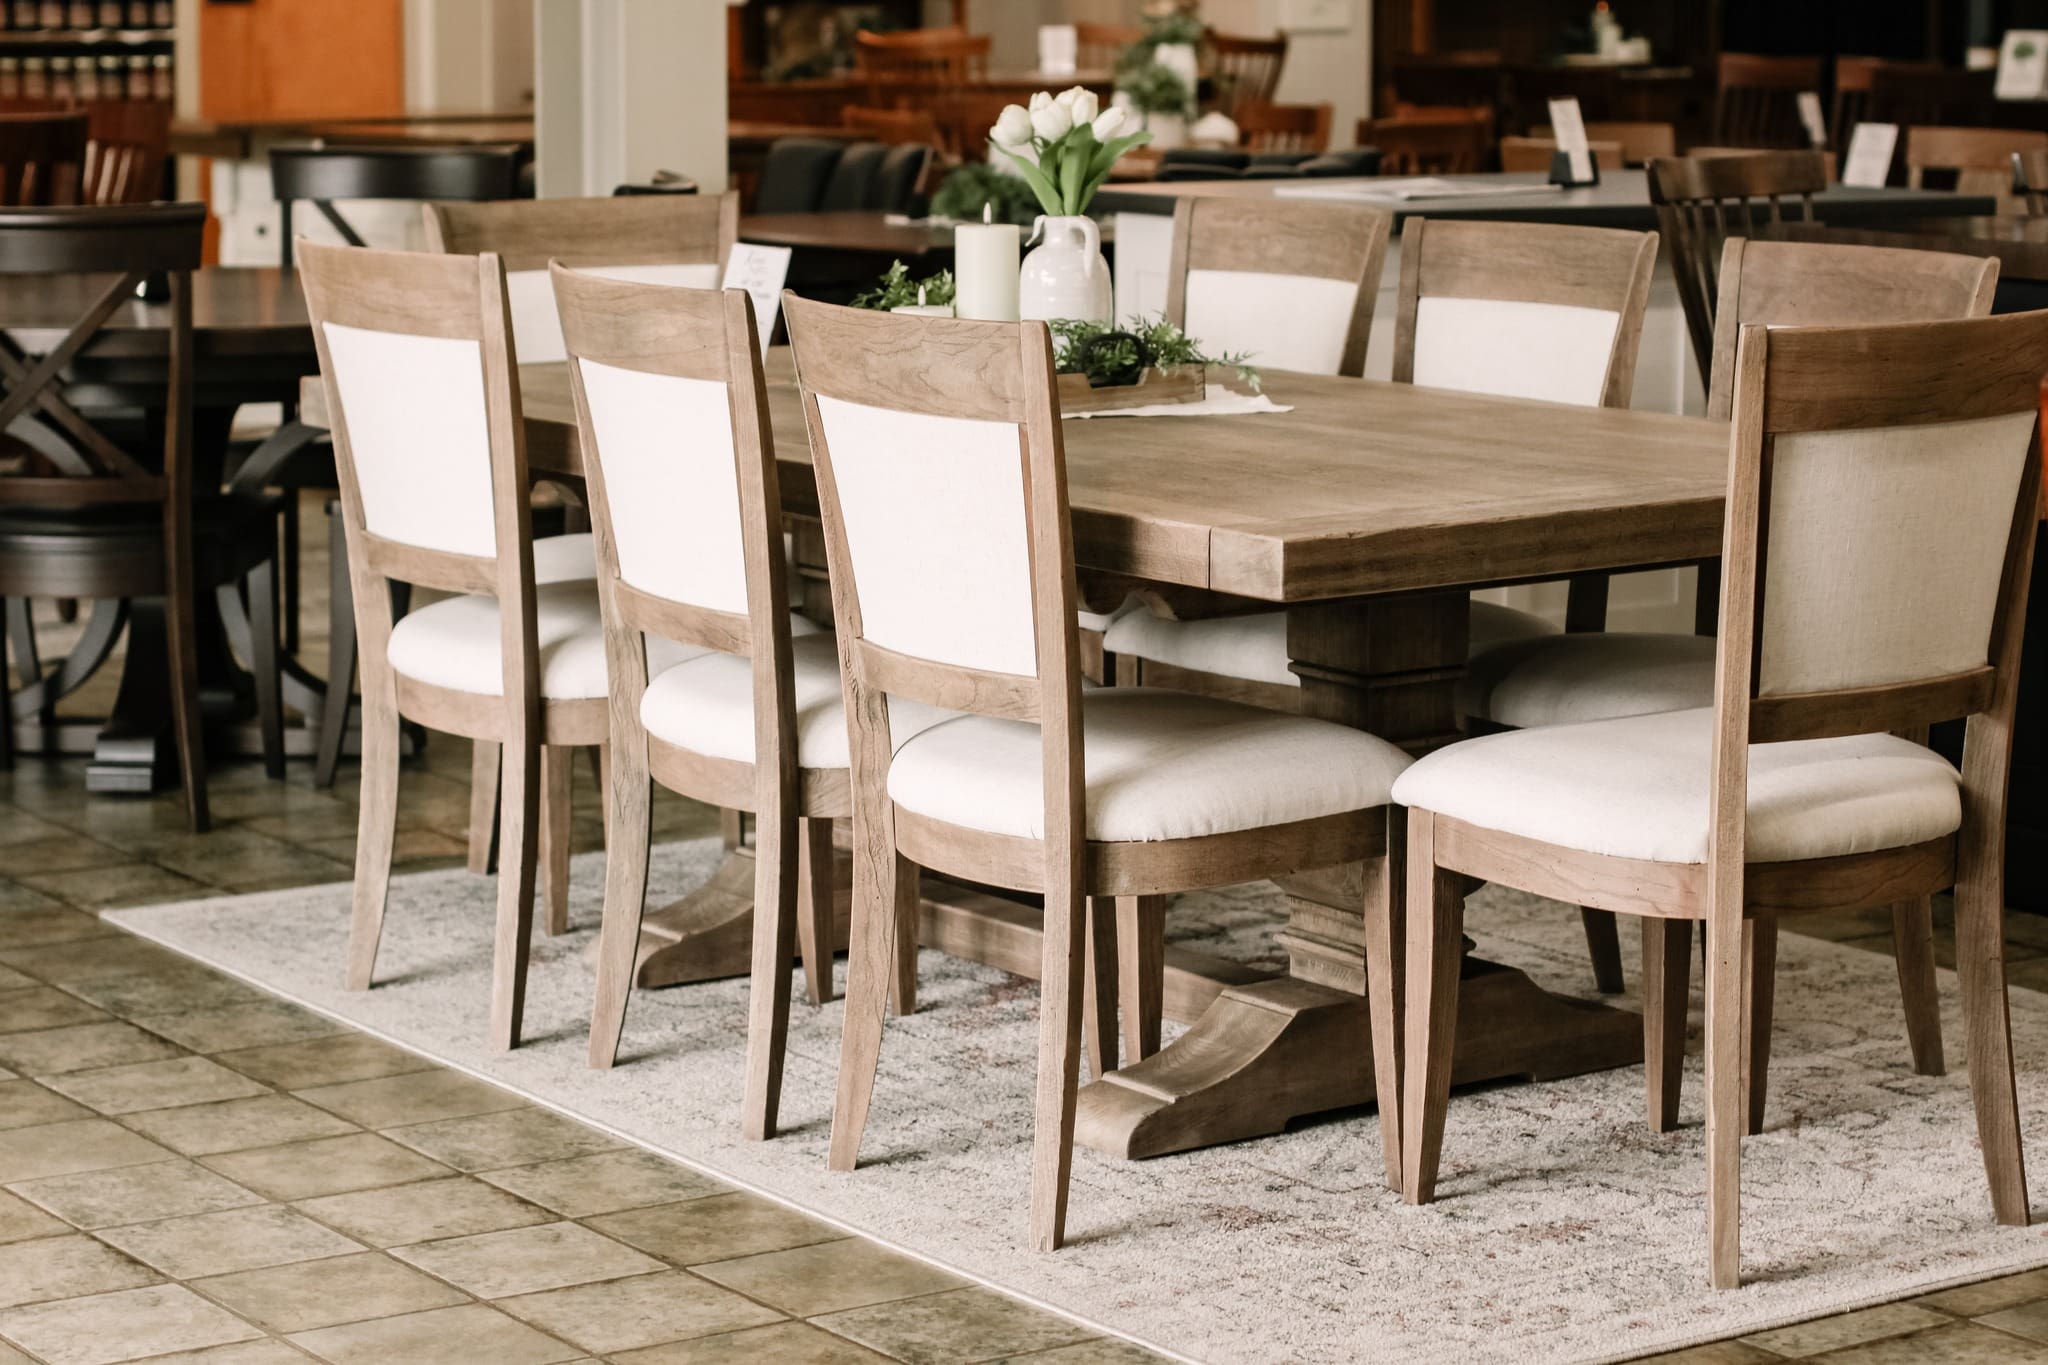 Tuscany dining set with a rectangle light wood trestle table and 8 white and light wood chairs.